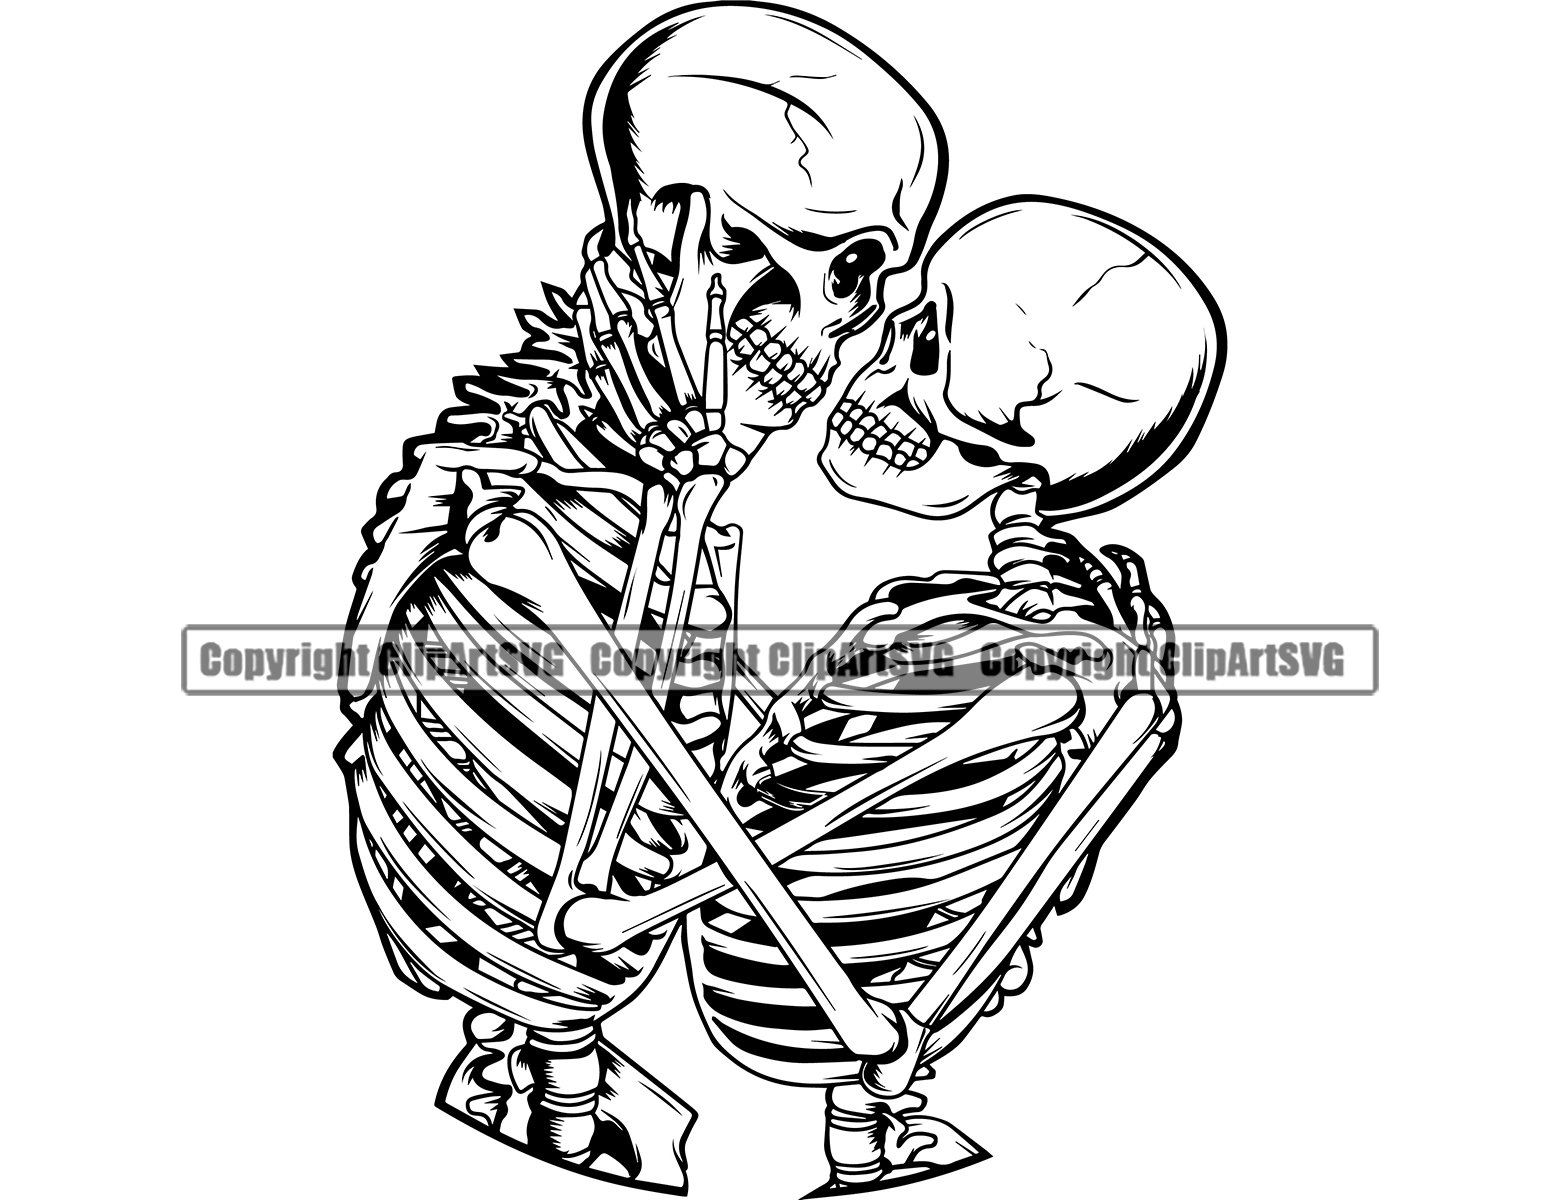 Ink And Pistons A pair of complimentary embracing skeletons on 